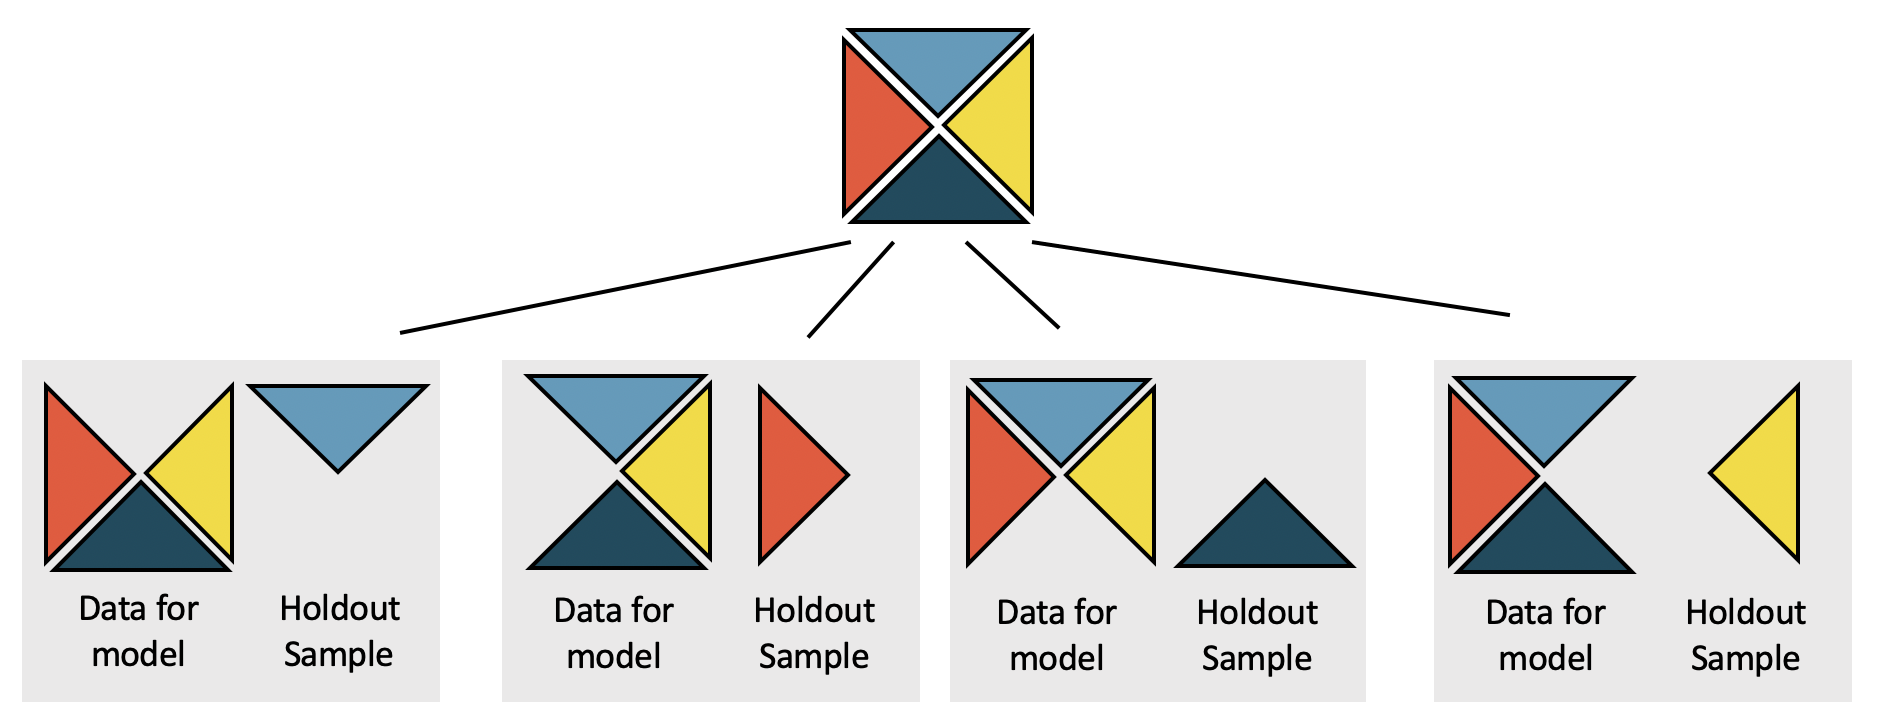 A square represents the original observed data which has been partitioned into four triangular segments.  From the original partition, four different settings are considered. The first setting is such that the red, green, and yellow triangular representations of the data are used to build the model; the blue triangular representation of the data is heldout and used for independent model prediction. The second setting is such that the blue, green, and yellow triangular representations of the data are used to build the model; the red triangular representation of the data is heldout and used for independent model prediction. The third setting is such that the red, blue, and yellow triangular representations of the data are used to build the model; the green triangular representation of the data is heldout and used for independent model prediction. The fourth setting is such that the red, green, and blue triangular representations of the data are used to build the model; the yellow triangular representation of the data is heldout and used for independent model prediction.